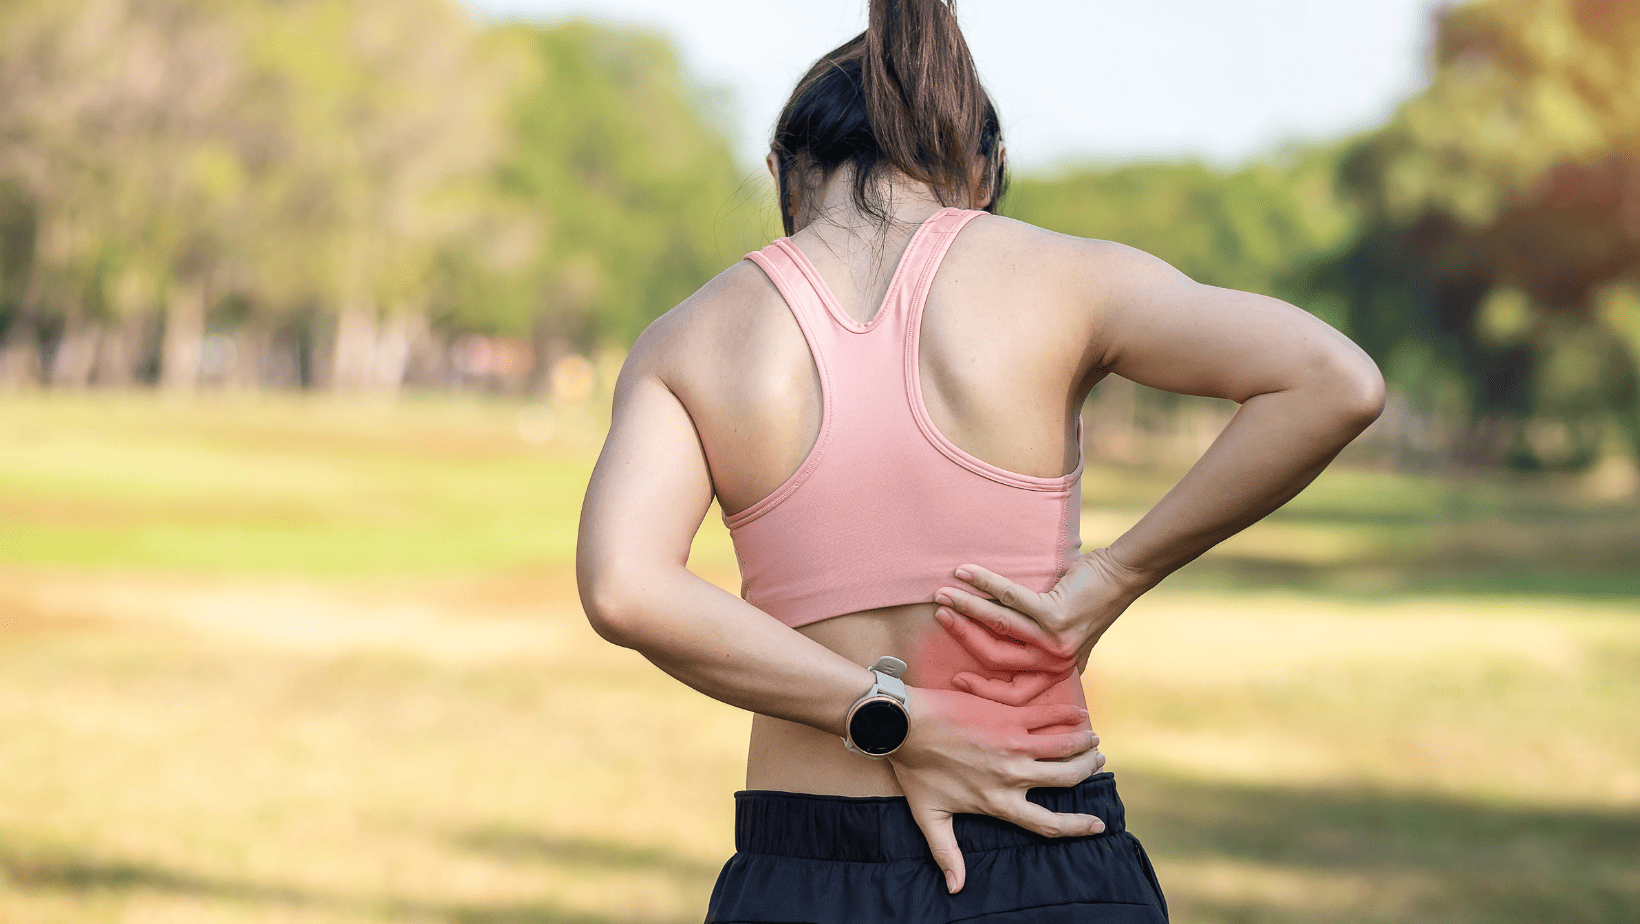 6 Tips For Exercising With A Bad Back